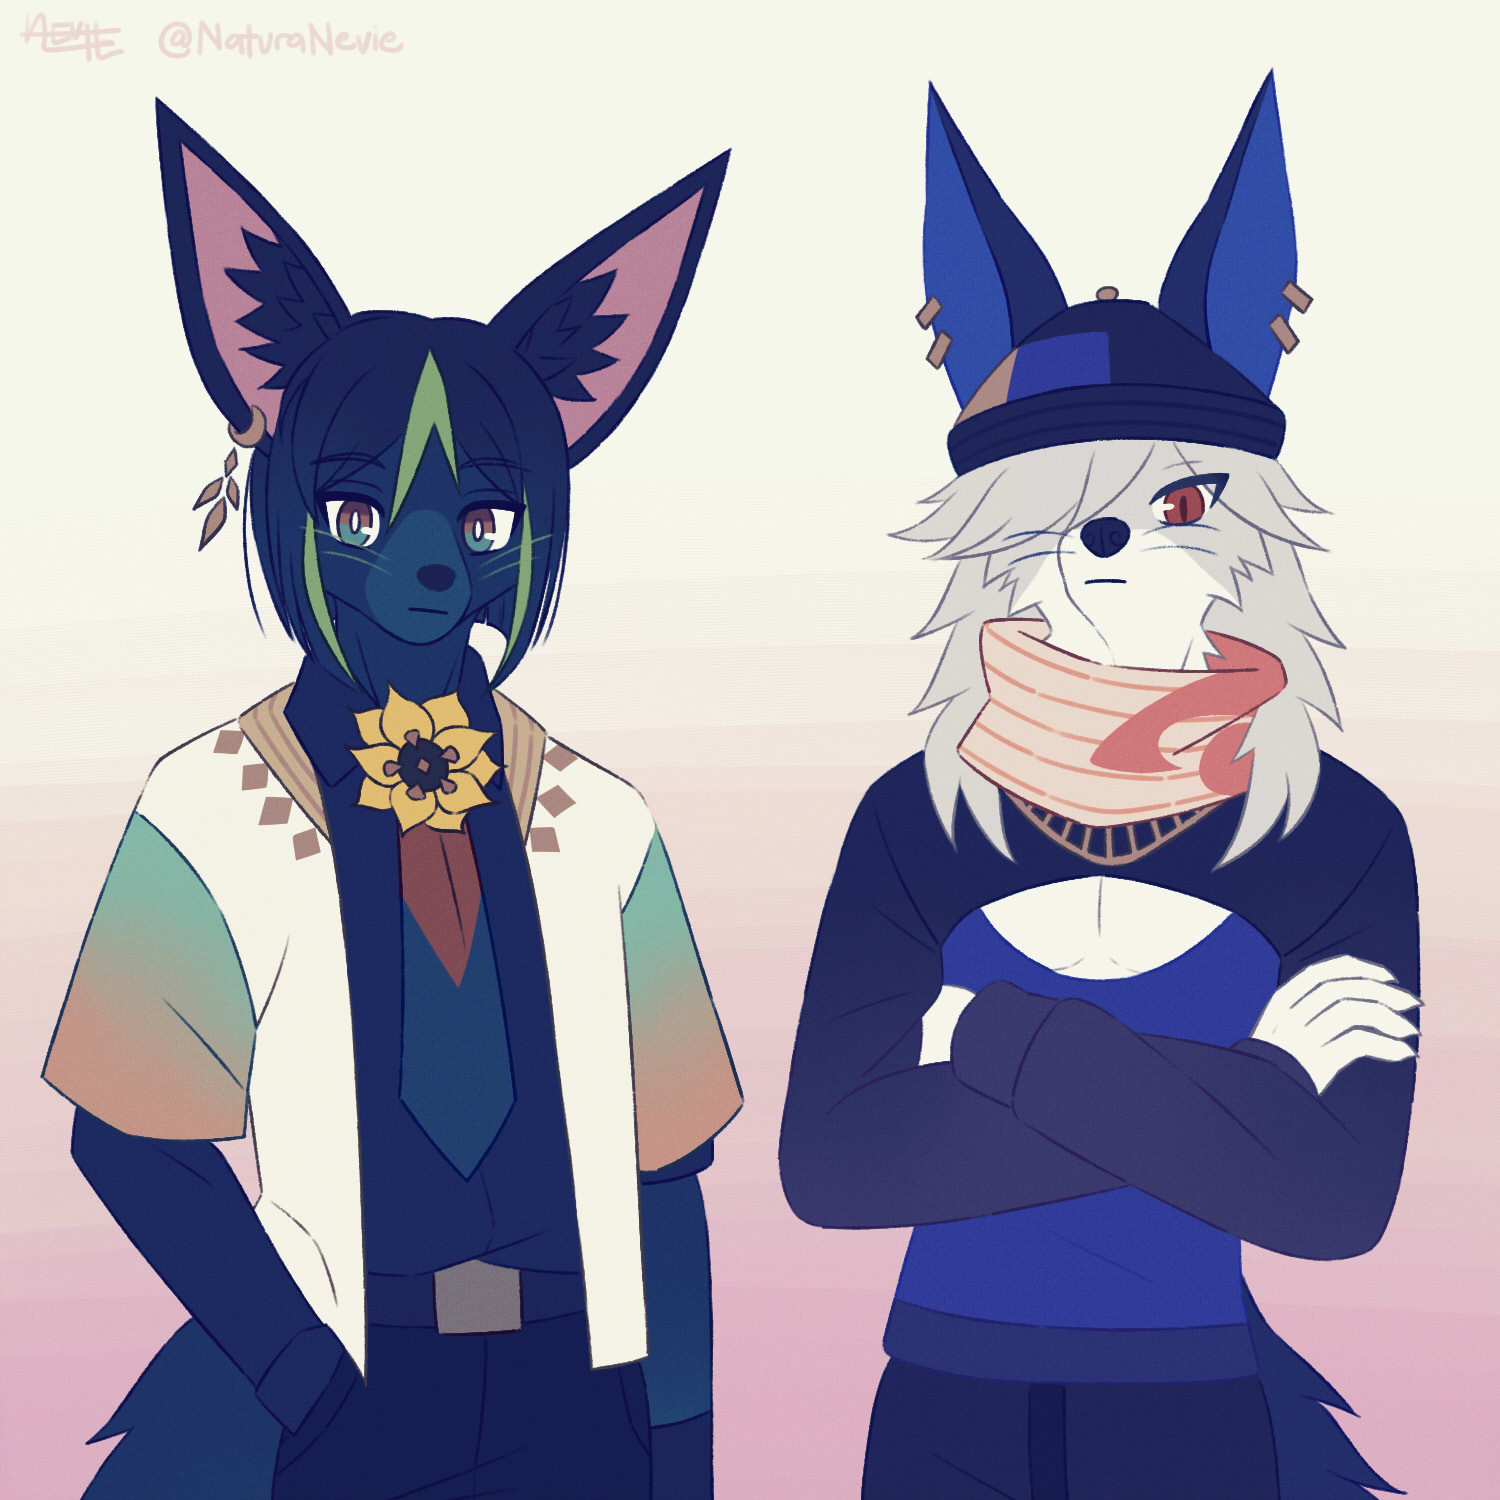 Tighnari And Cyno By Naturanevie Fur Affinity Dot Net 